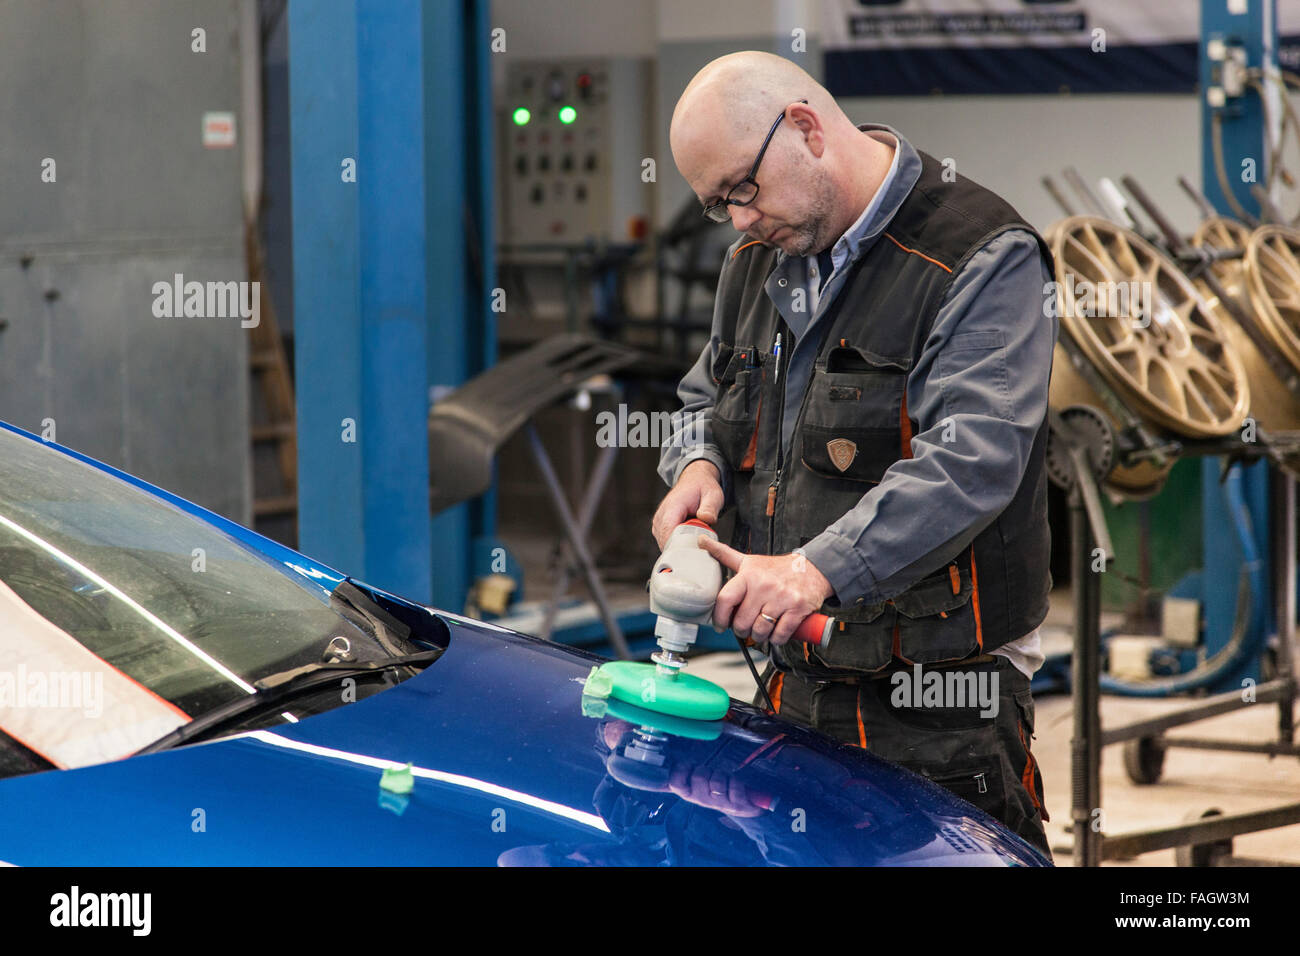 Car-body polishes the varnish of a vehicle. Stock Photo